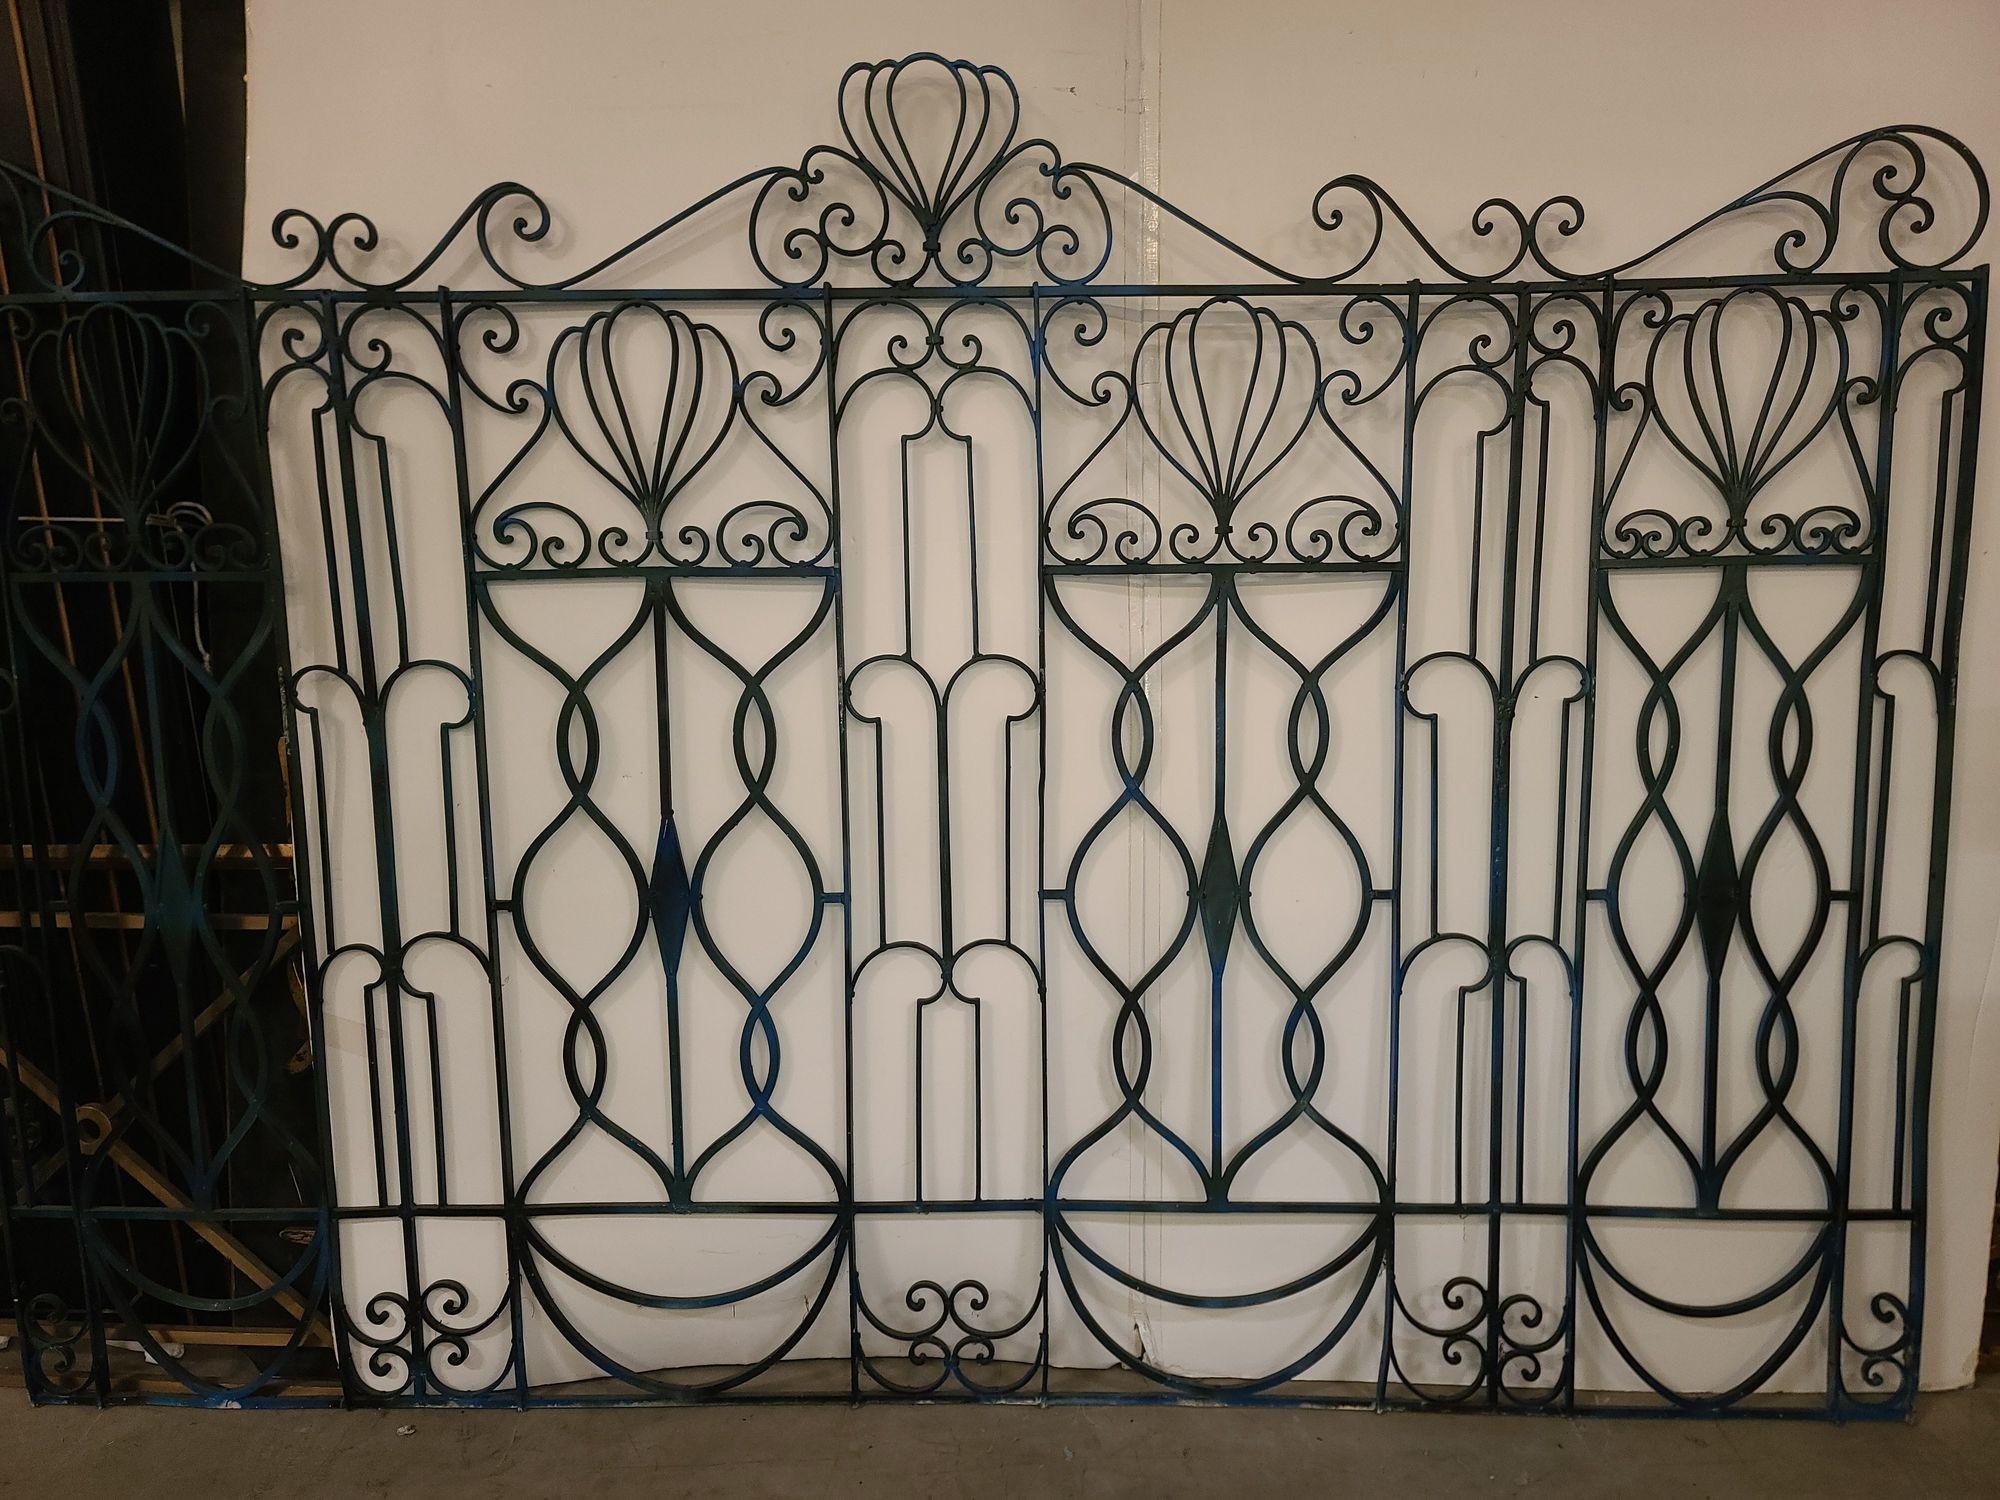 Antique Black Regency Scrolling Wrought Iron Fence Panel featuring scrolling and webbed patterns throughout its design. The gate has a traditional late Victorian Gothic revival design with a modern influence.

Panel: H 74.5